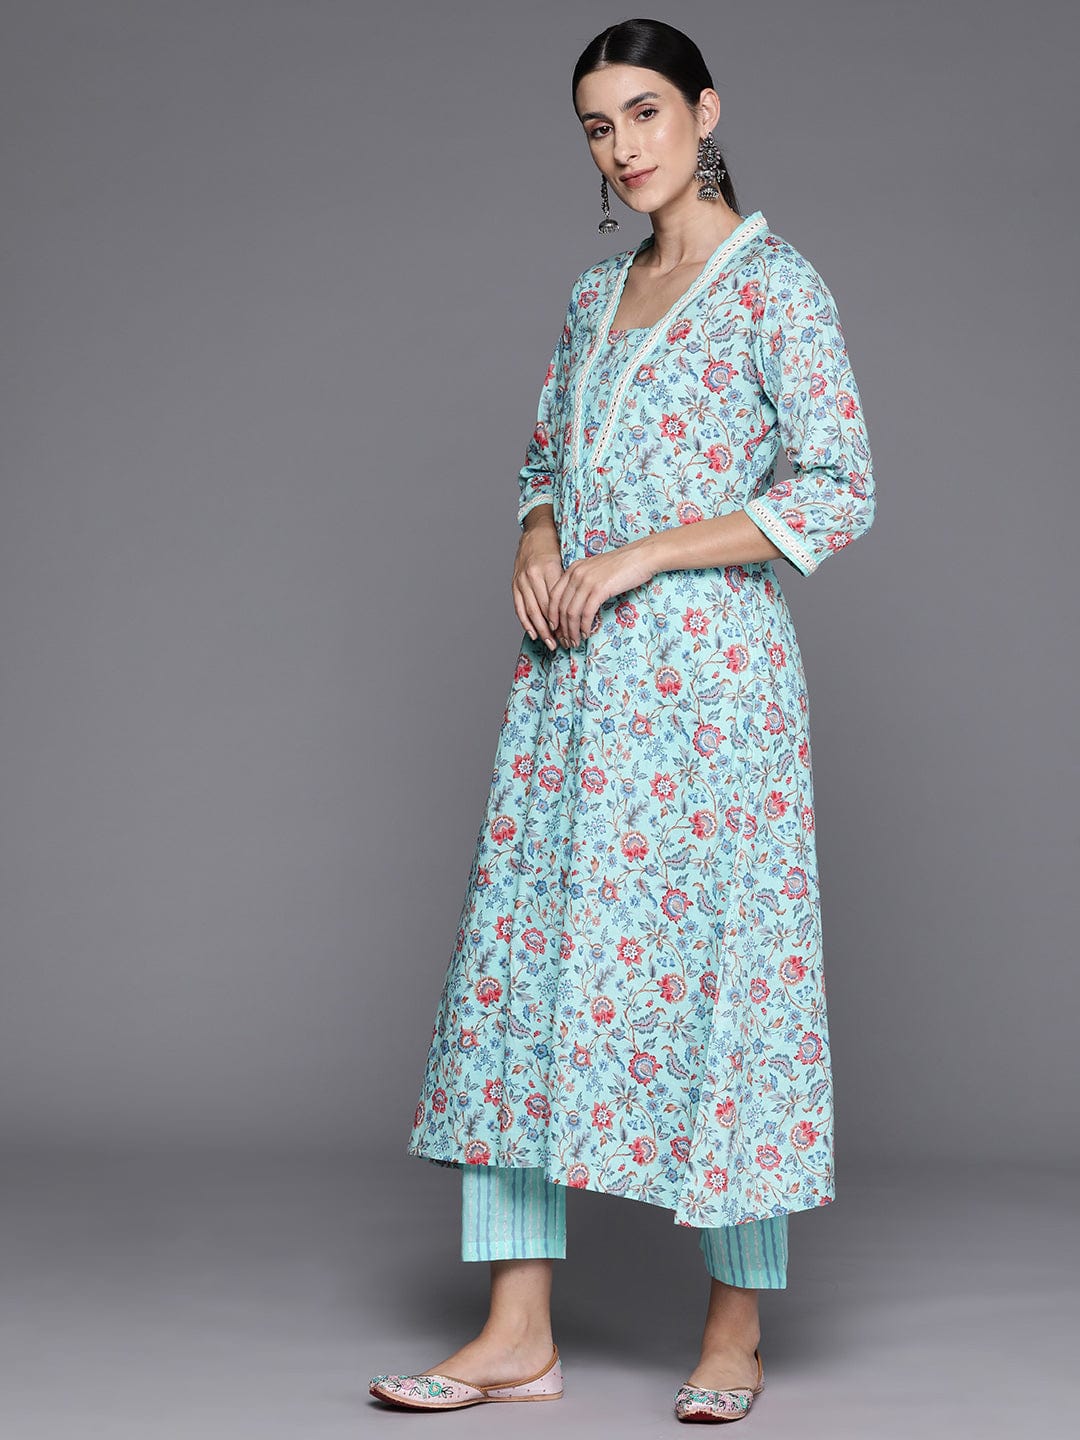 Blue Floral Printed A-Line Kurta With Three Quarter Sleeves Paired With Printed Bottom And Solid Chiffon Dupatta